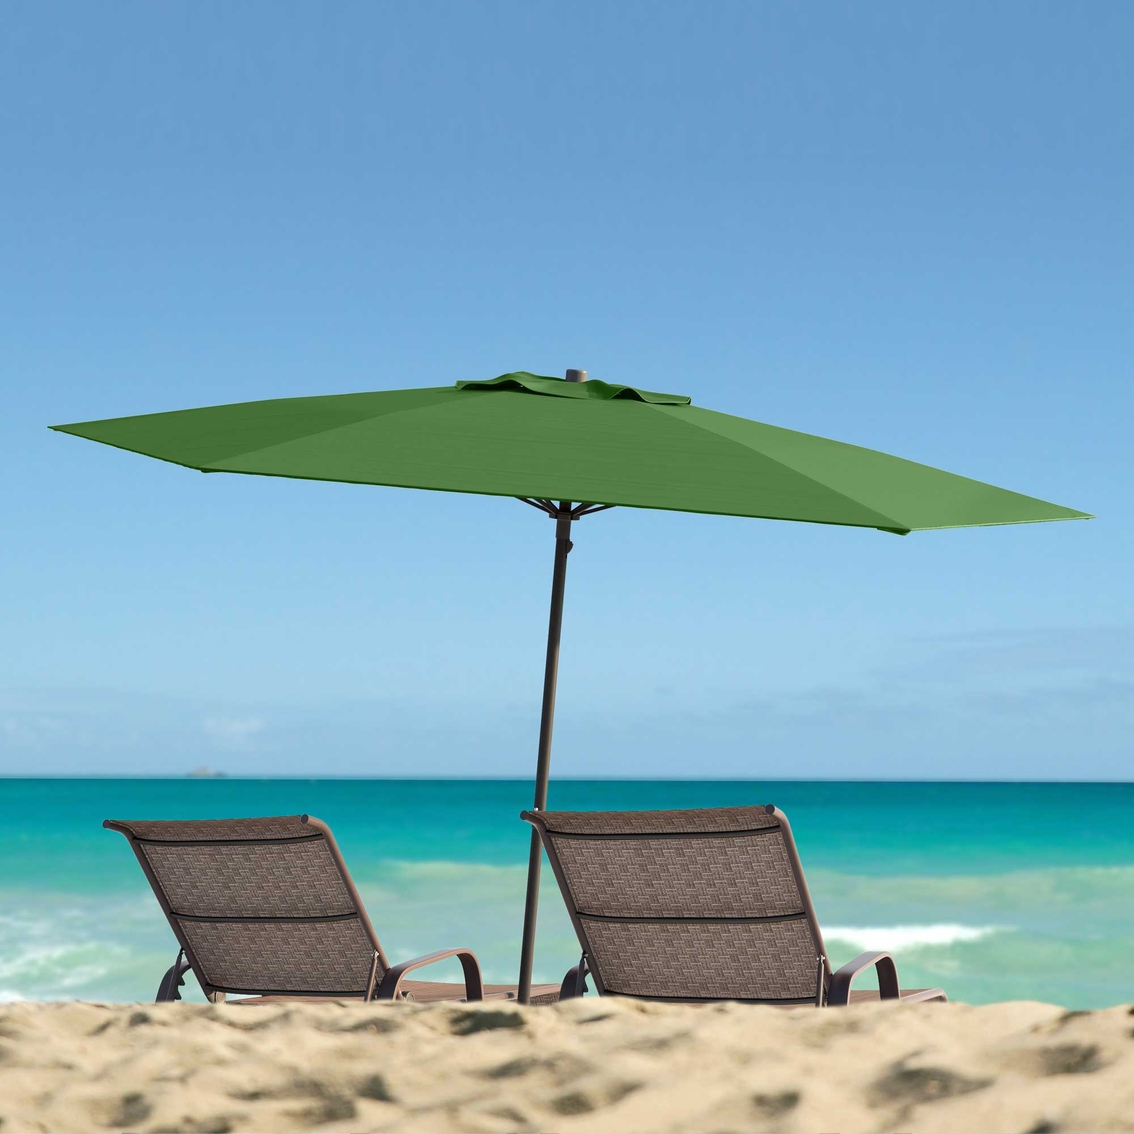 CorLiving 7.5 ft. UV and Wind Resistant Beach Patio Umbrella - Image 6 of 6